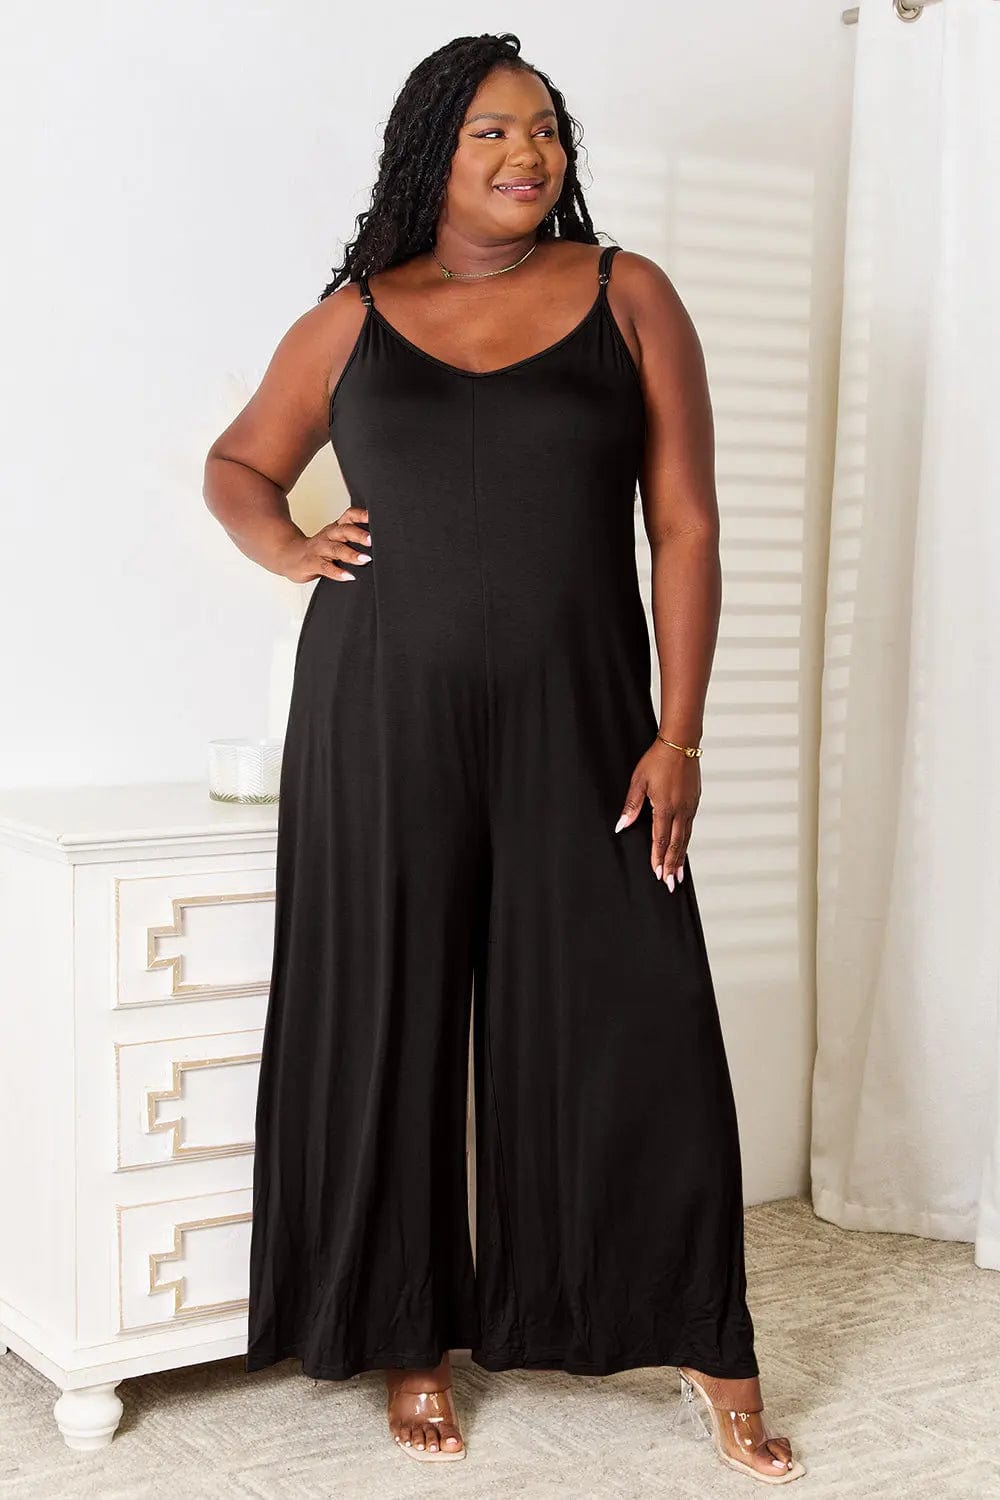 Double Take Full Size Soft Rayon Spaghetti Strap Tied Wide Leg Jumpsuit  35.00 MPGD Corp Merchandise